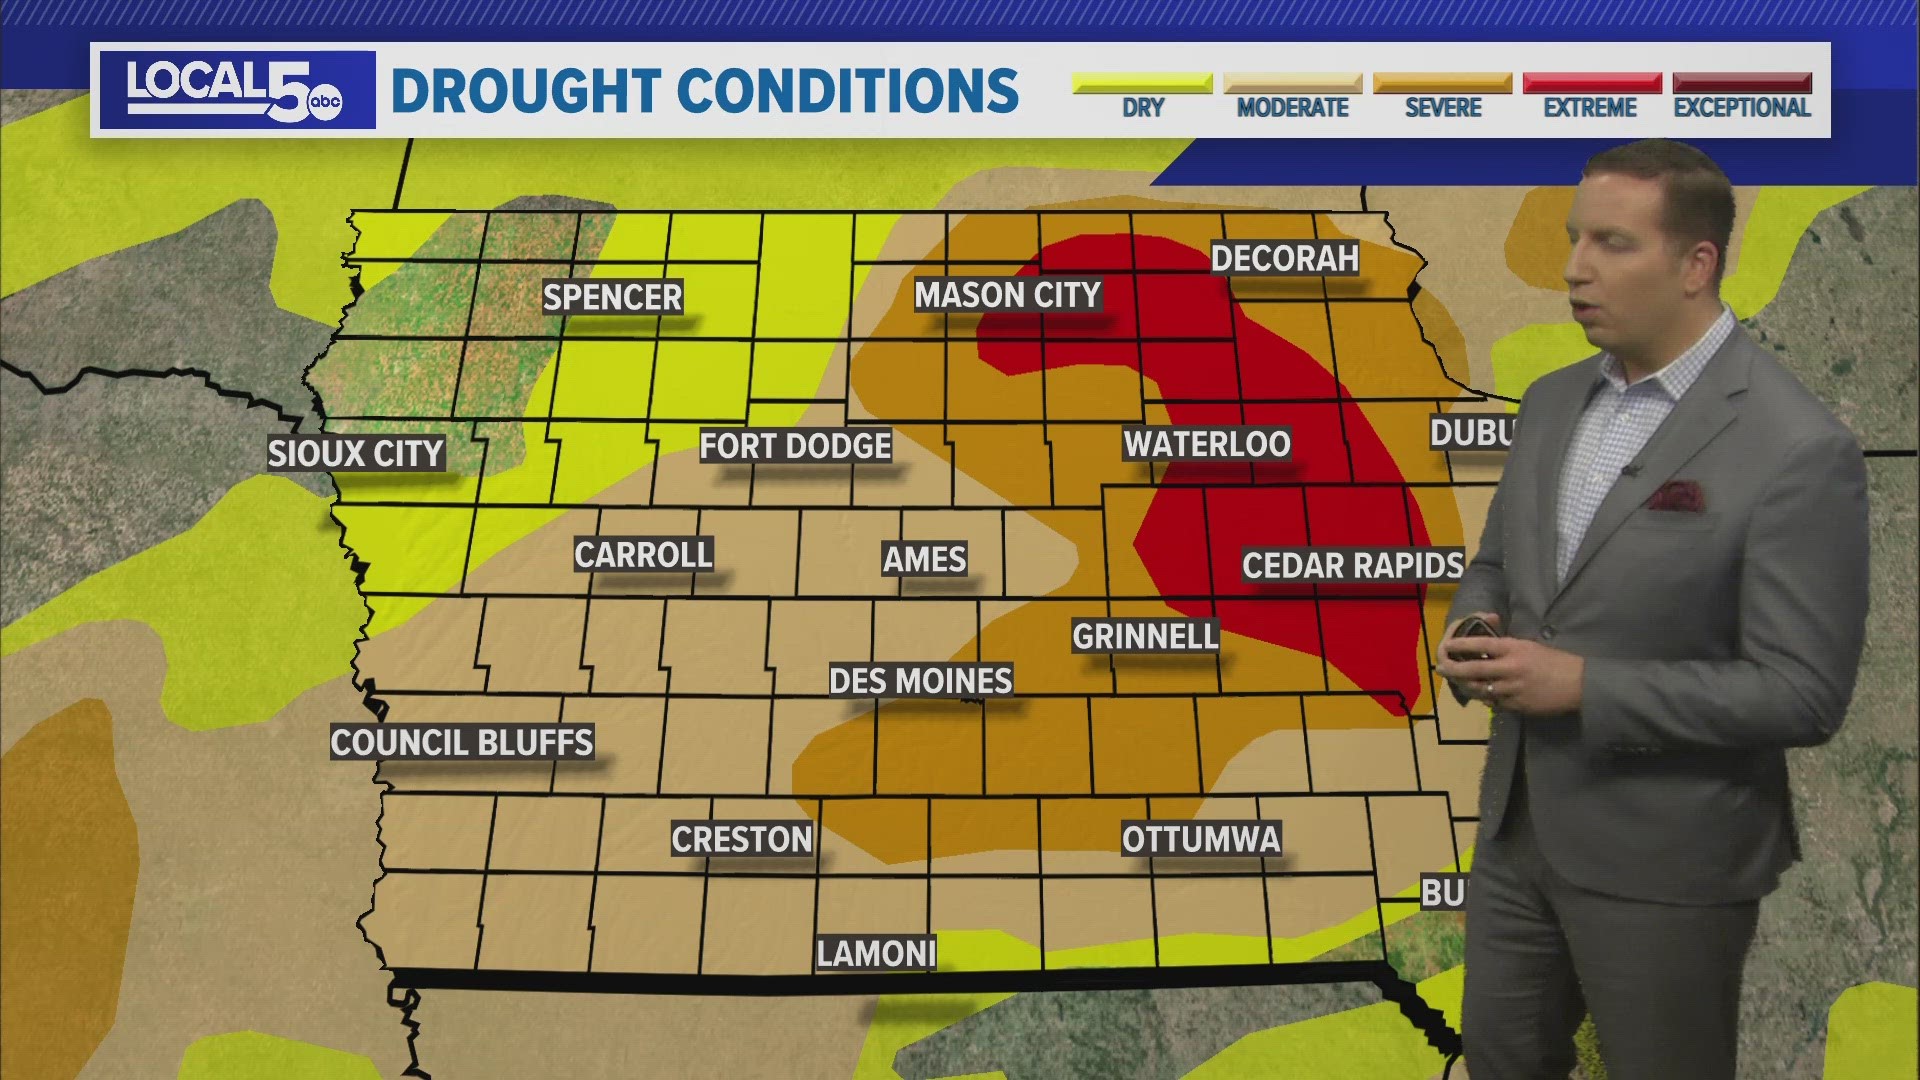 Extreme drought in Iowa: Recent rain reducing drought conditions